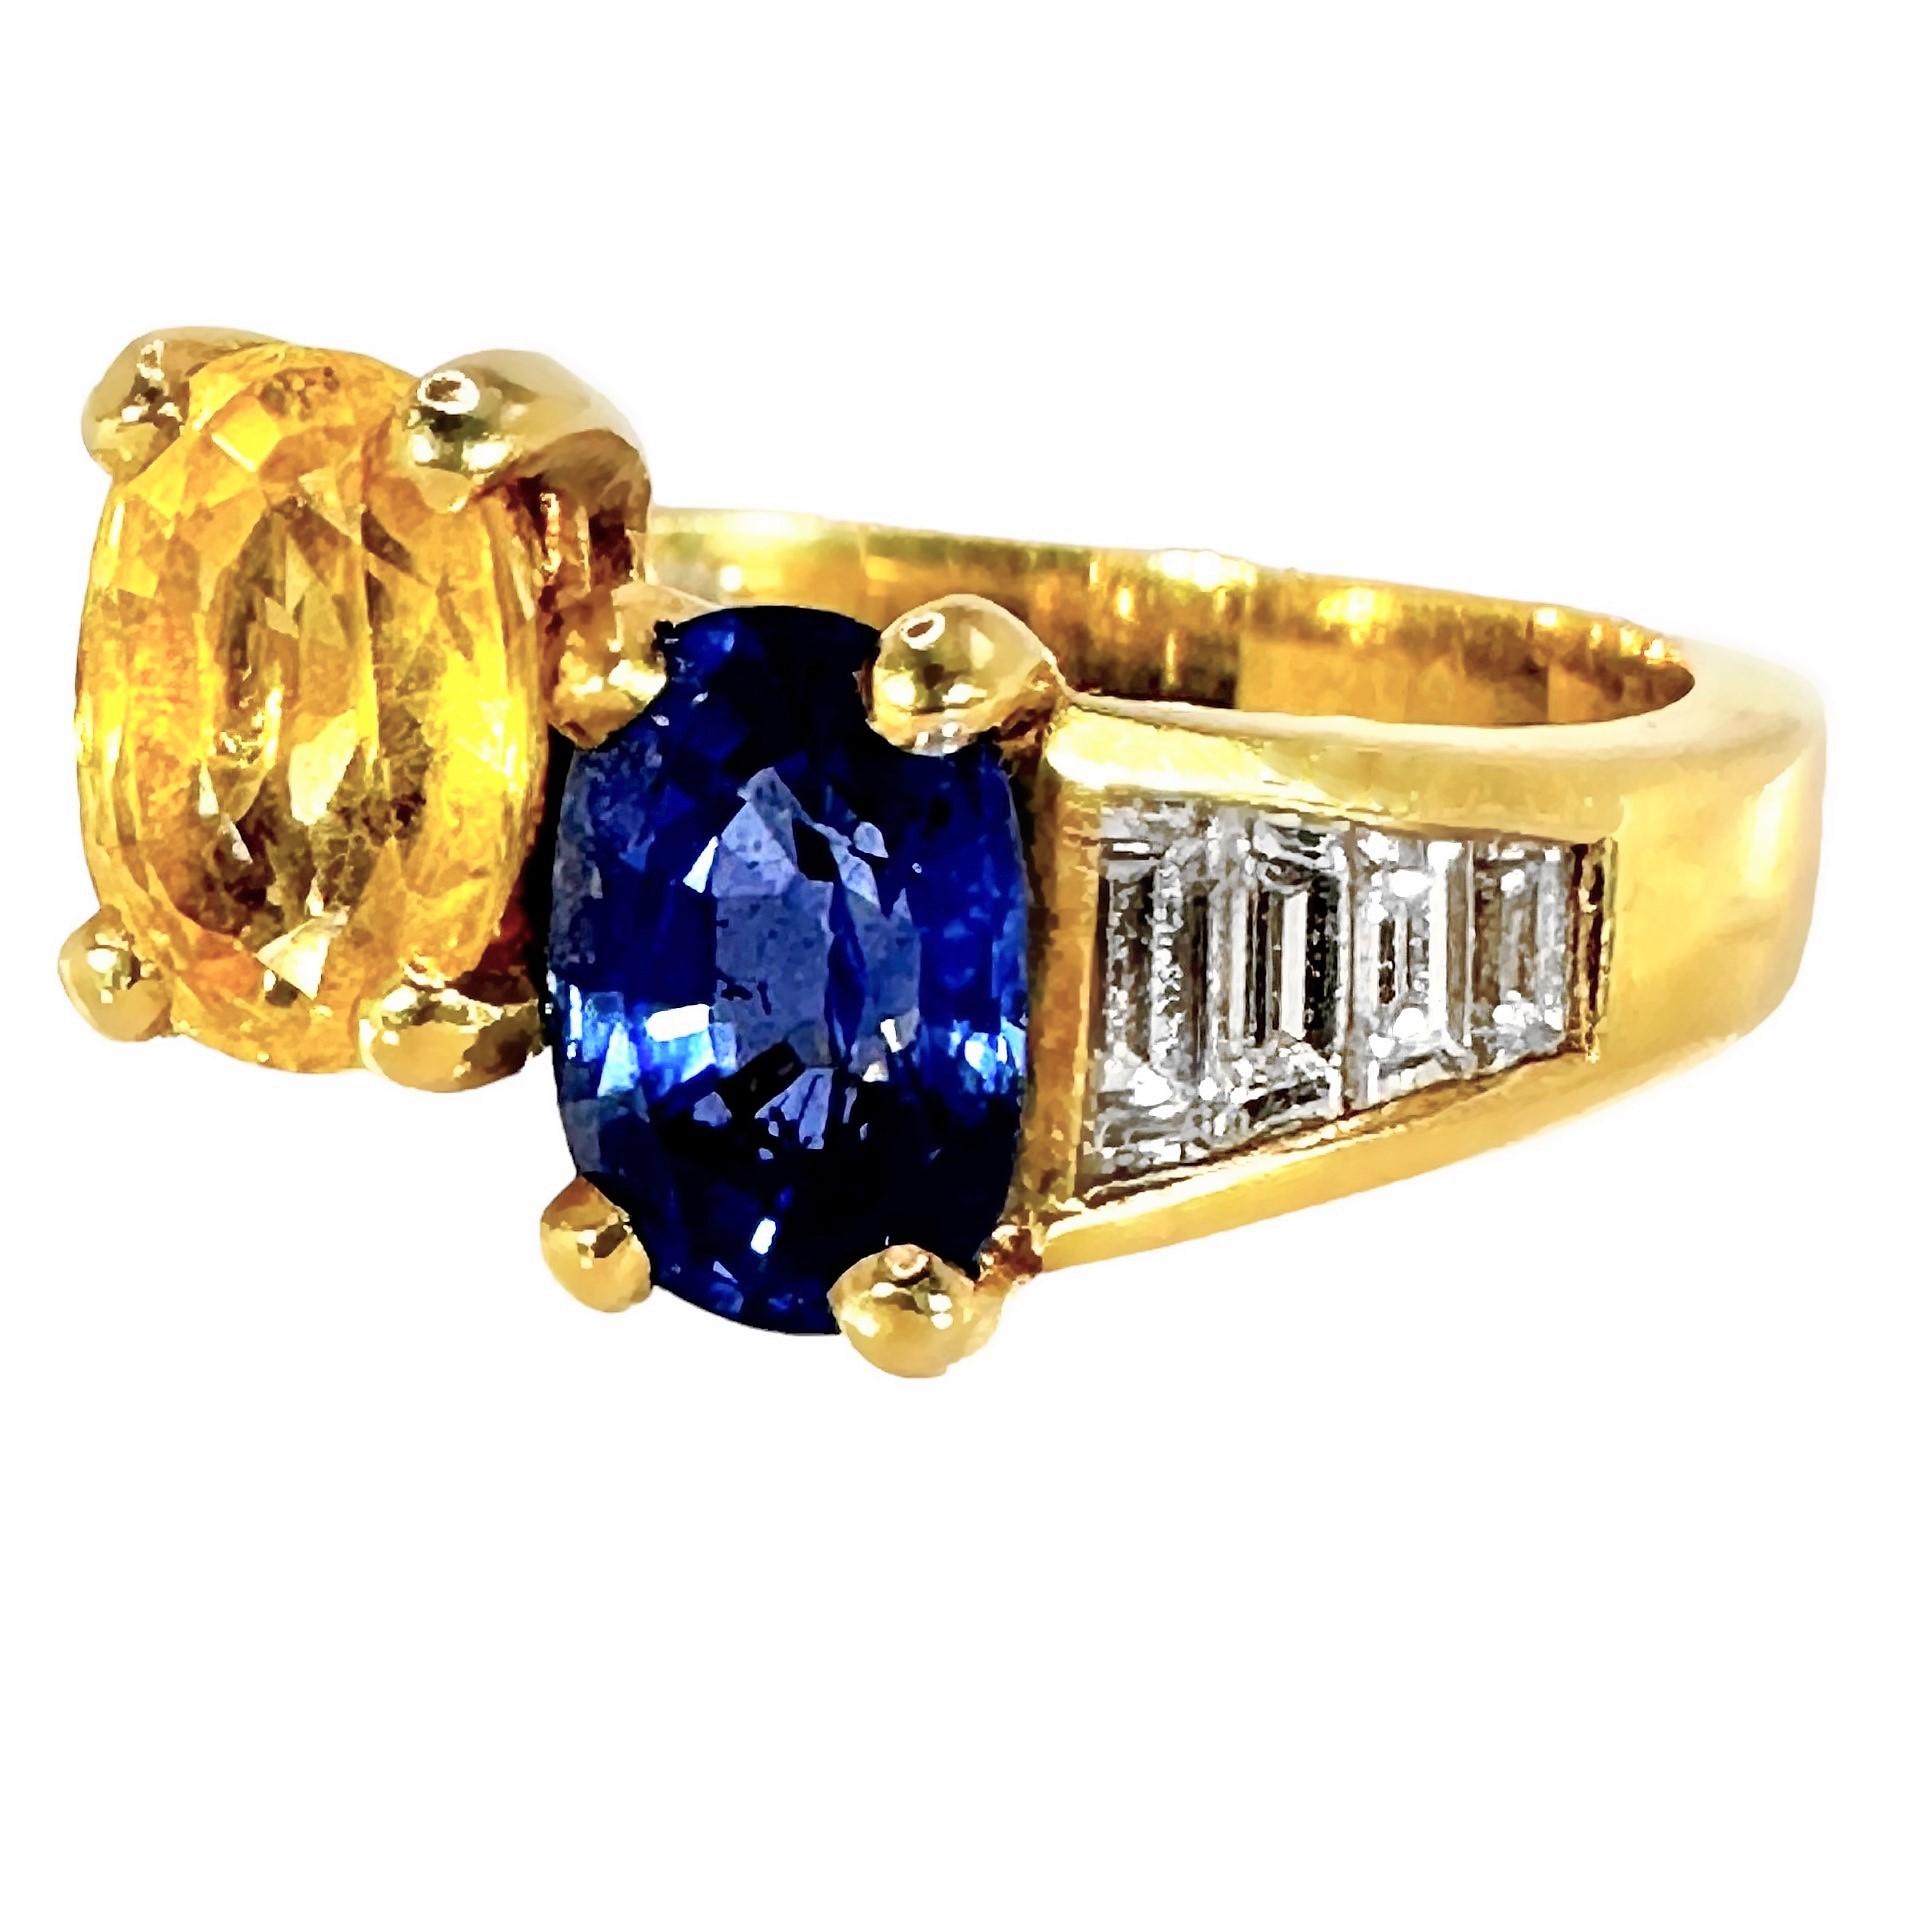 This tailored, smaller scale, 18k yellow gold vintage Julius Cohen sapphire and diamond offset ring is truly a mid-20th Century treasure. It is prong set with one oval shaped, brilliant natural blue sapphire and one oval shaped, brilliant natural